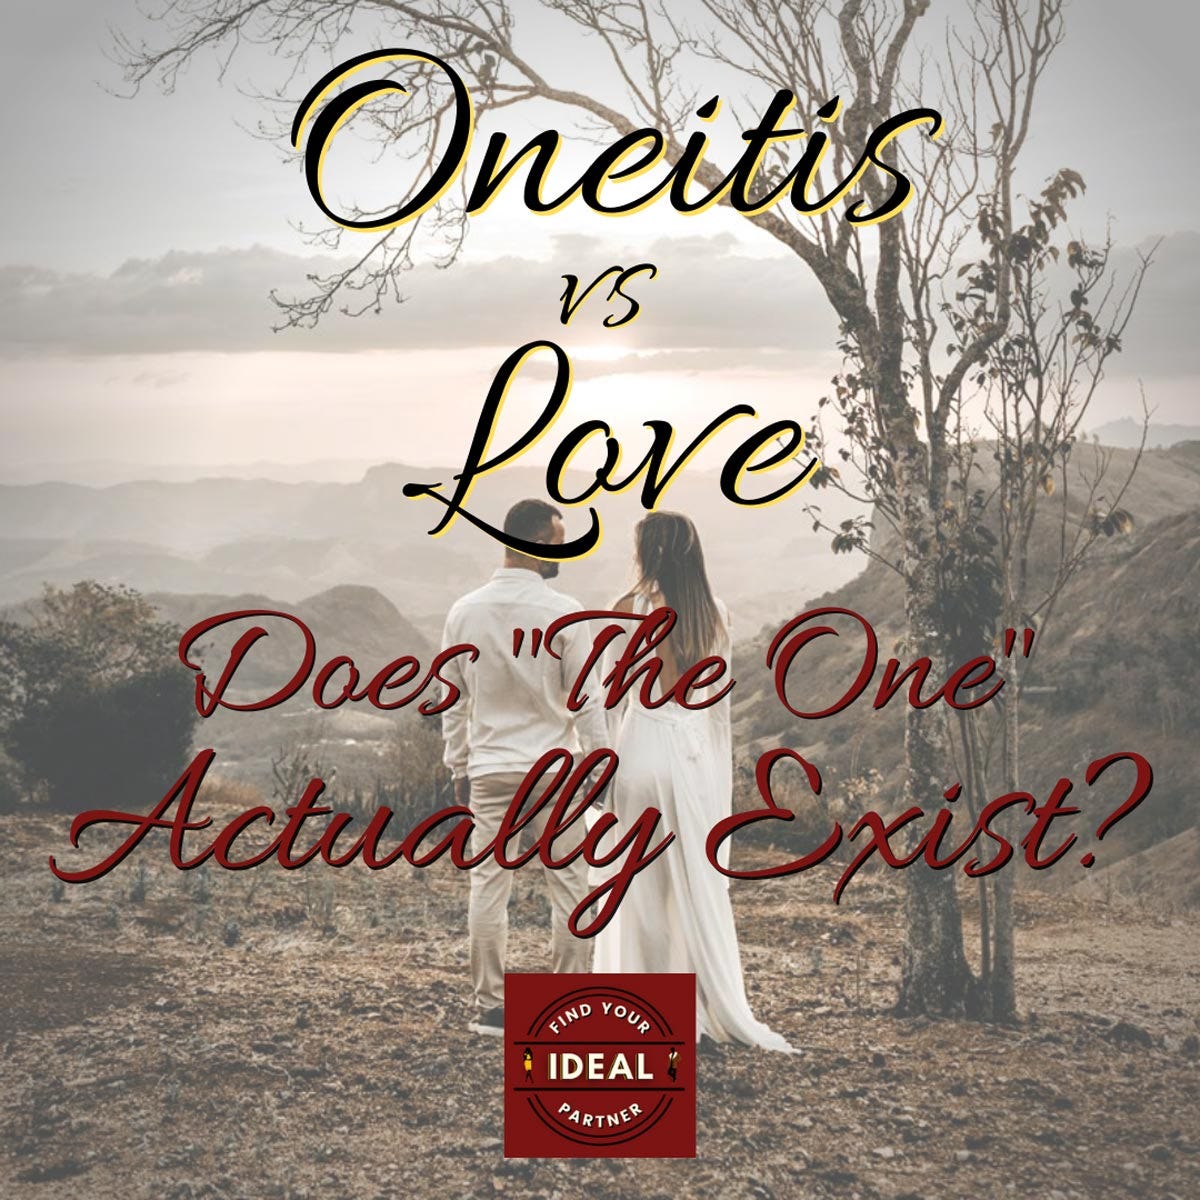 Oneitis vs Love — Does “The One” Actually Exist?